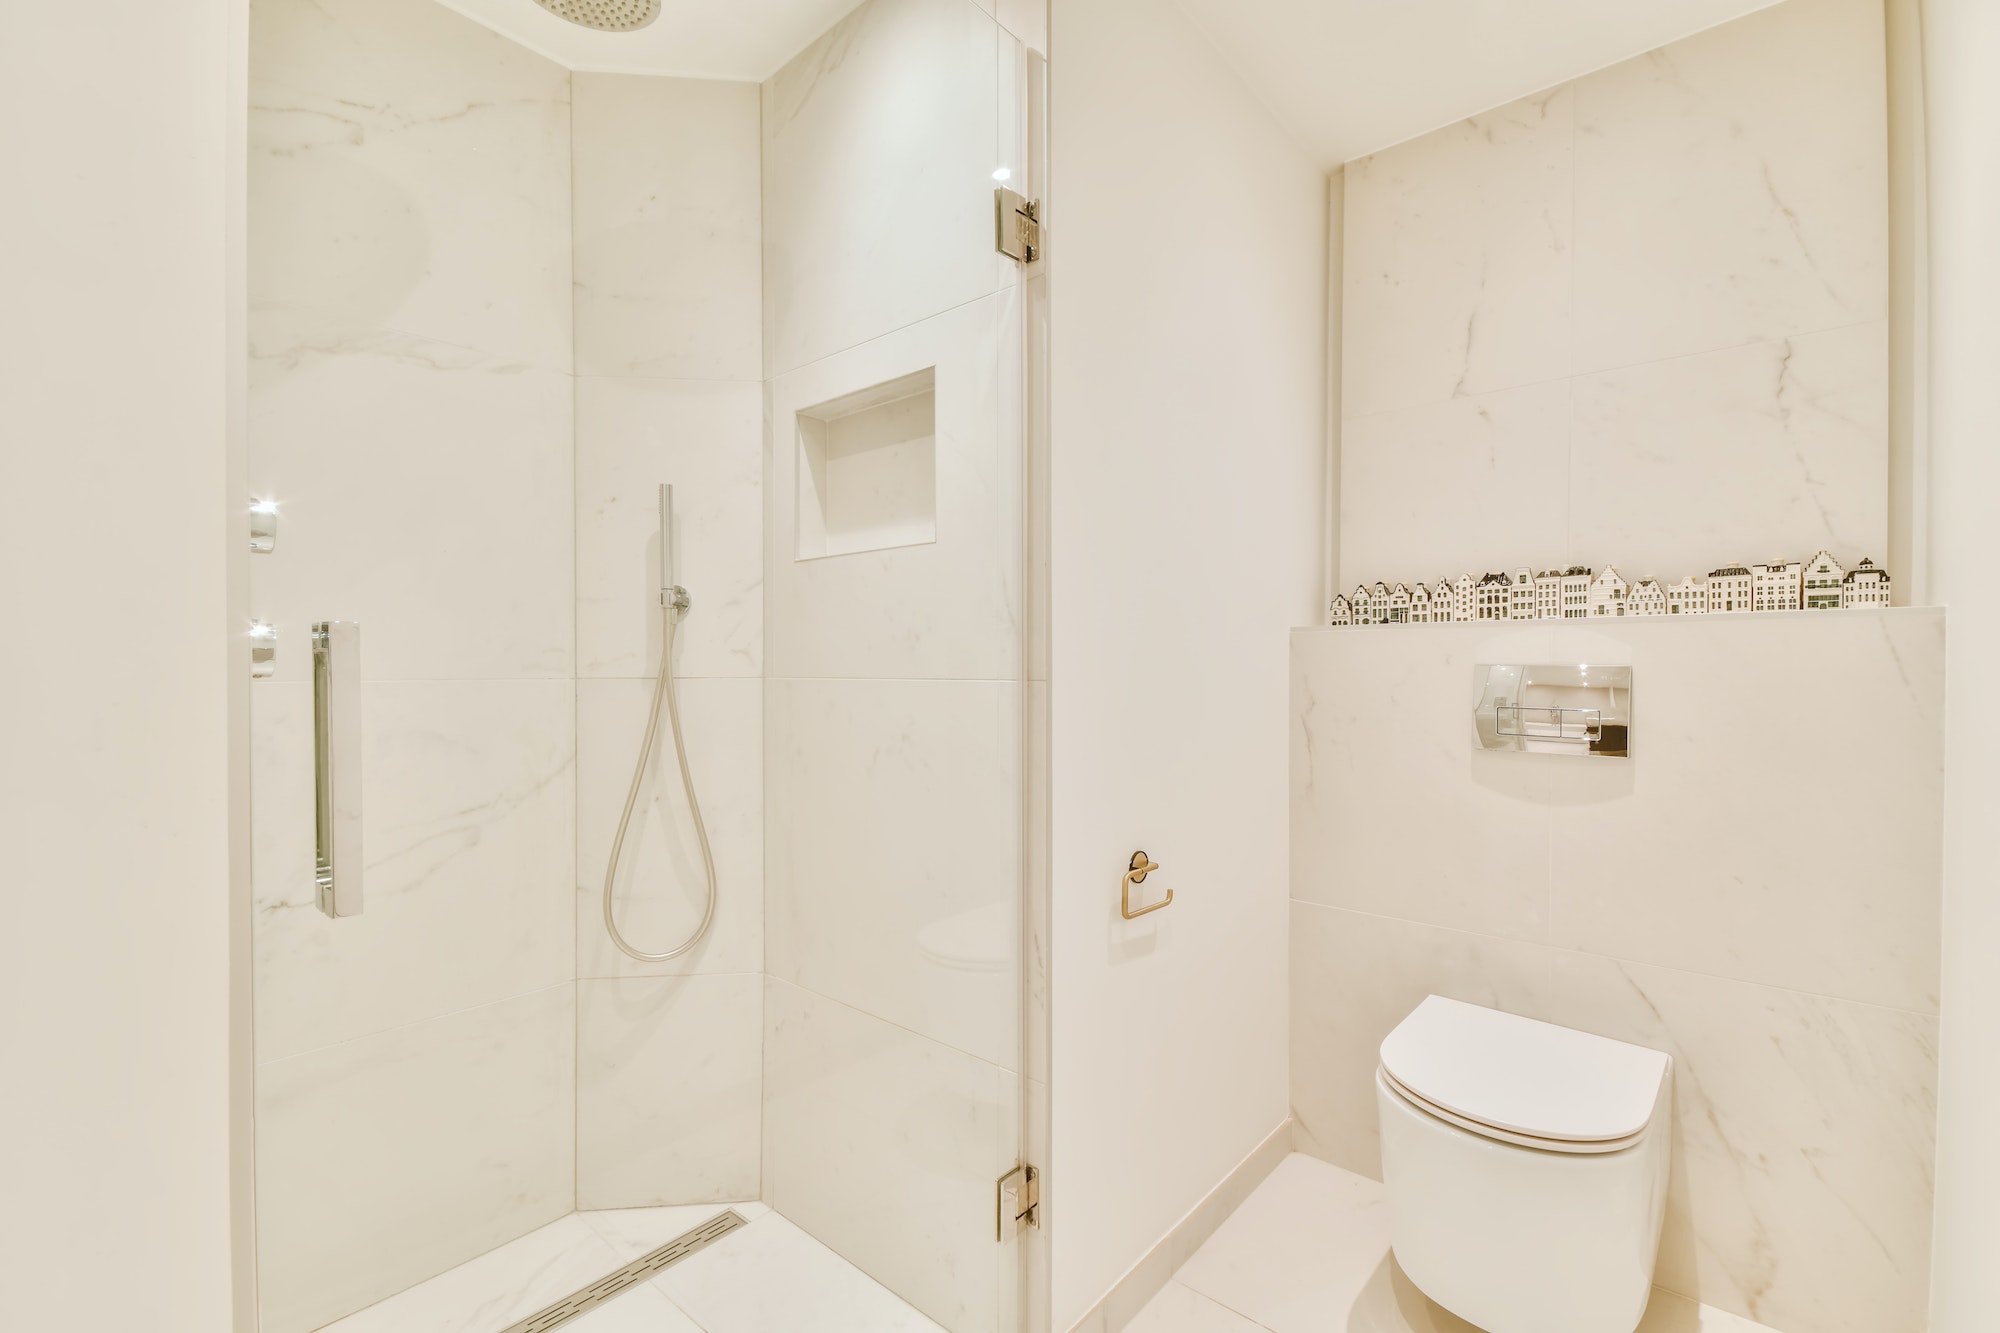 Bathroom with built-in shower head in the shower